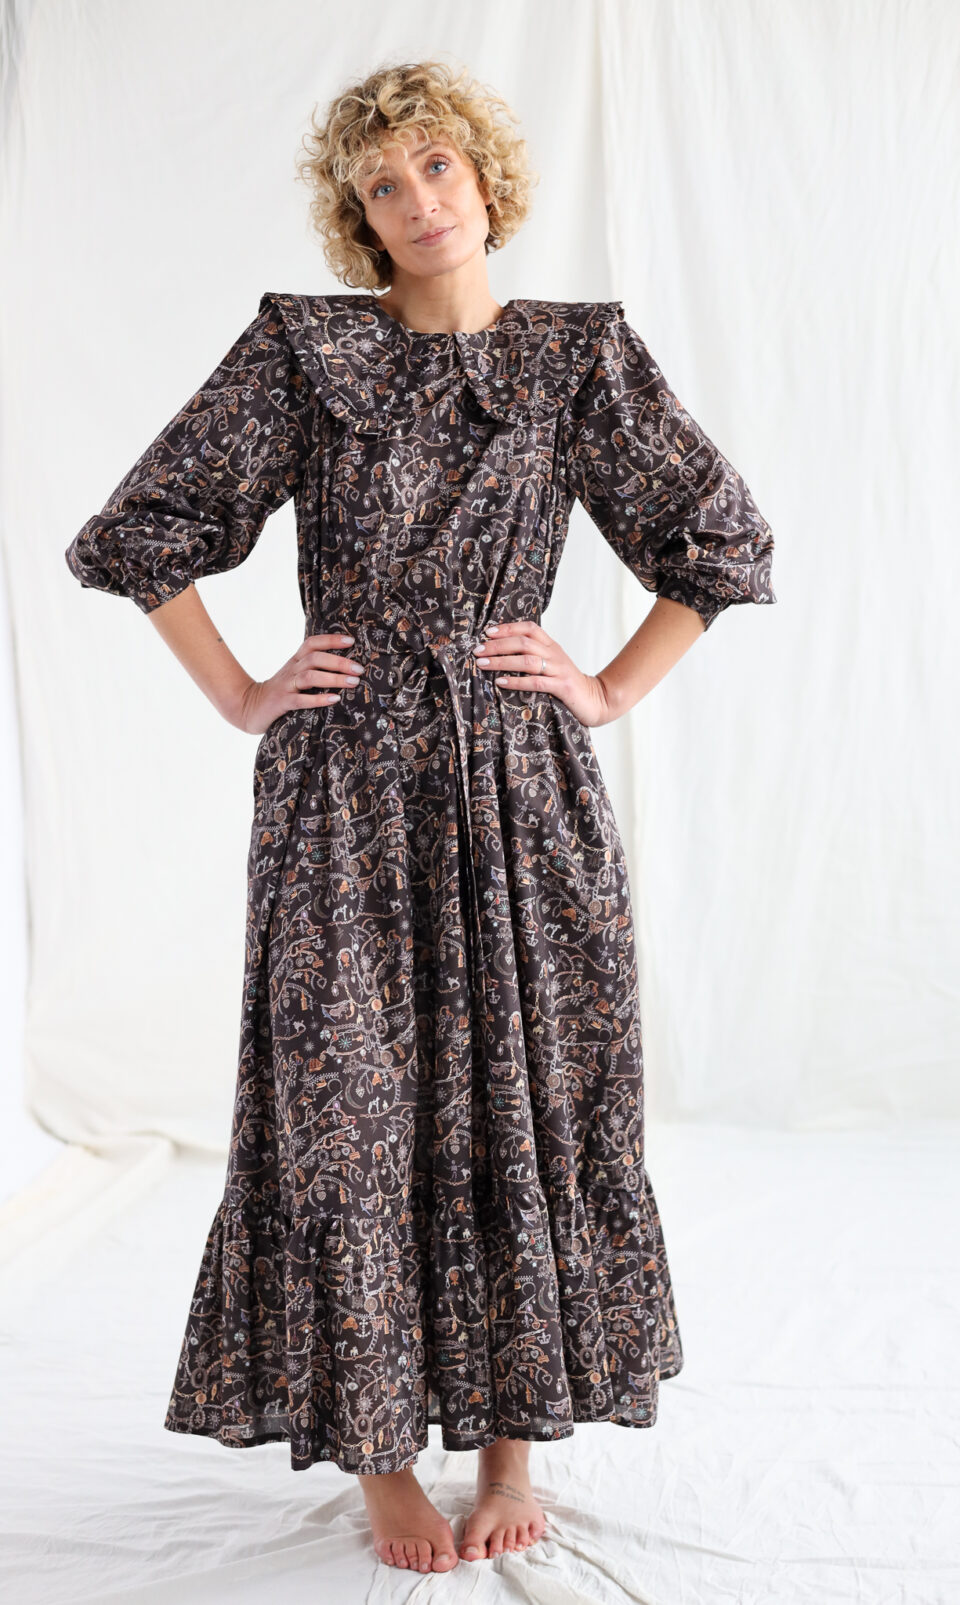 Large collar maxi vintage chain print dress AUBREY | Dress | Sustainable clothing | OffOn clothing